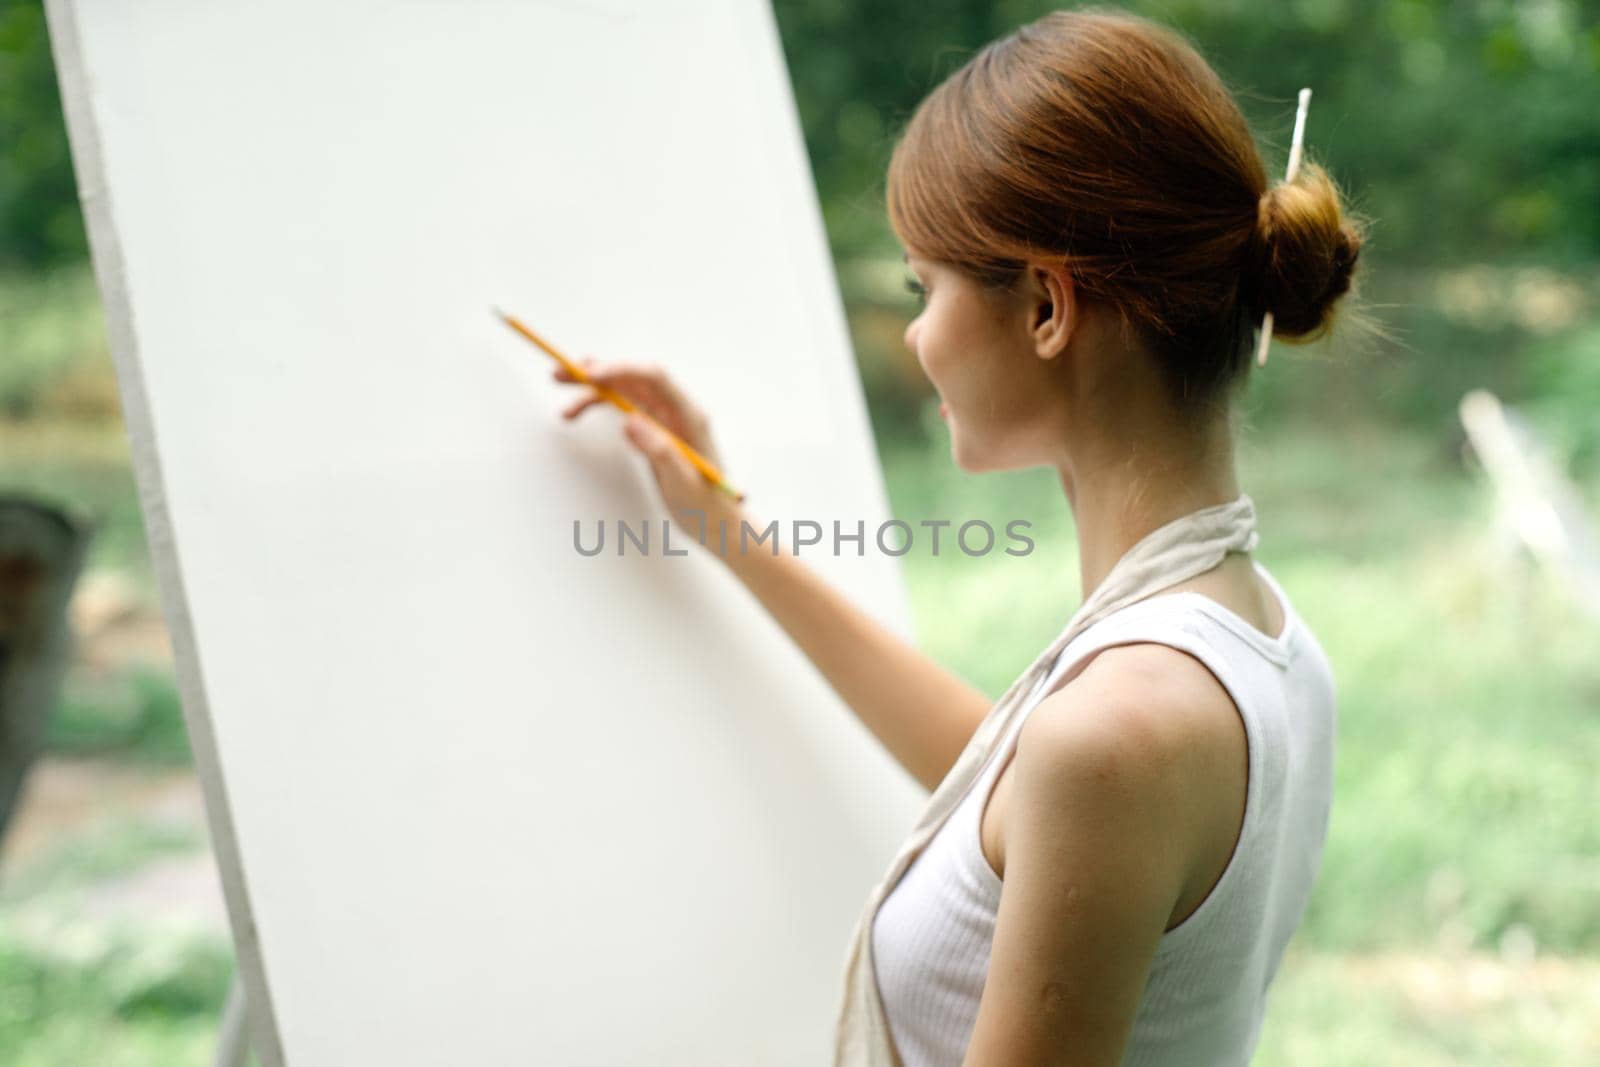 an artist in nature draws on an easel with a pencil by Vichizh